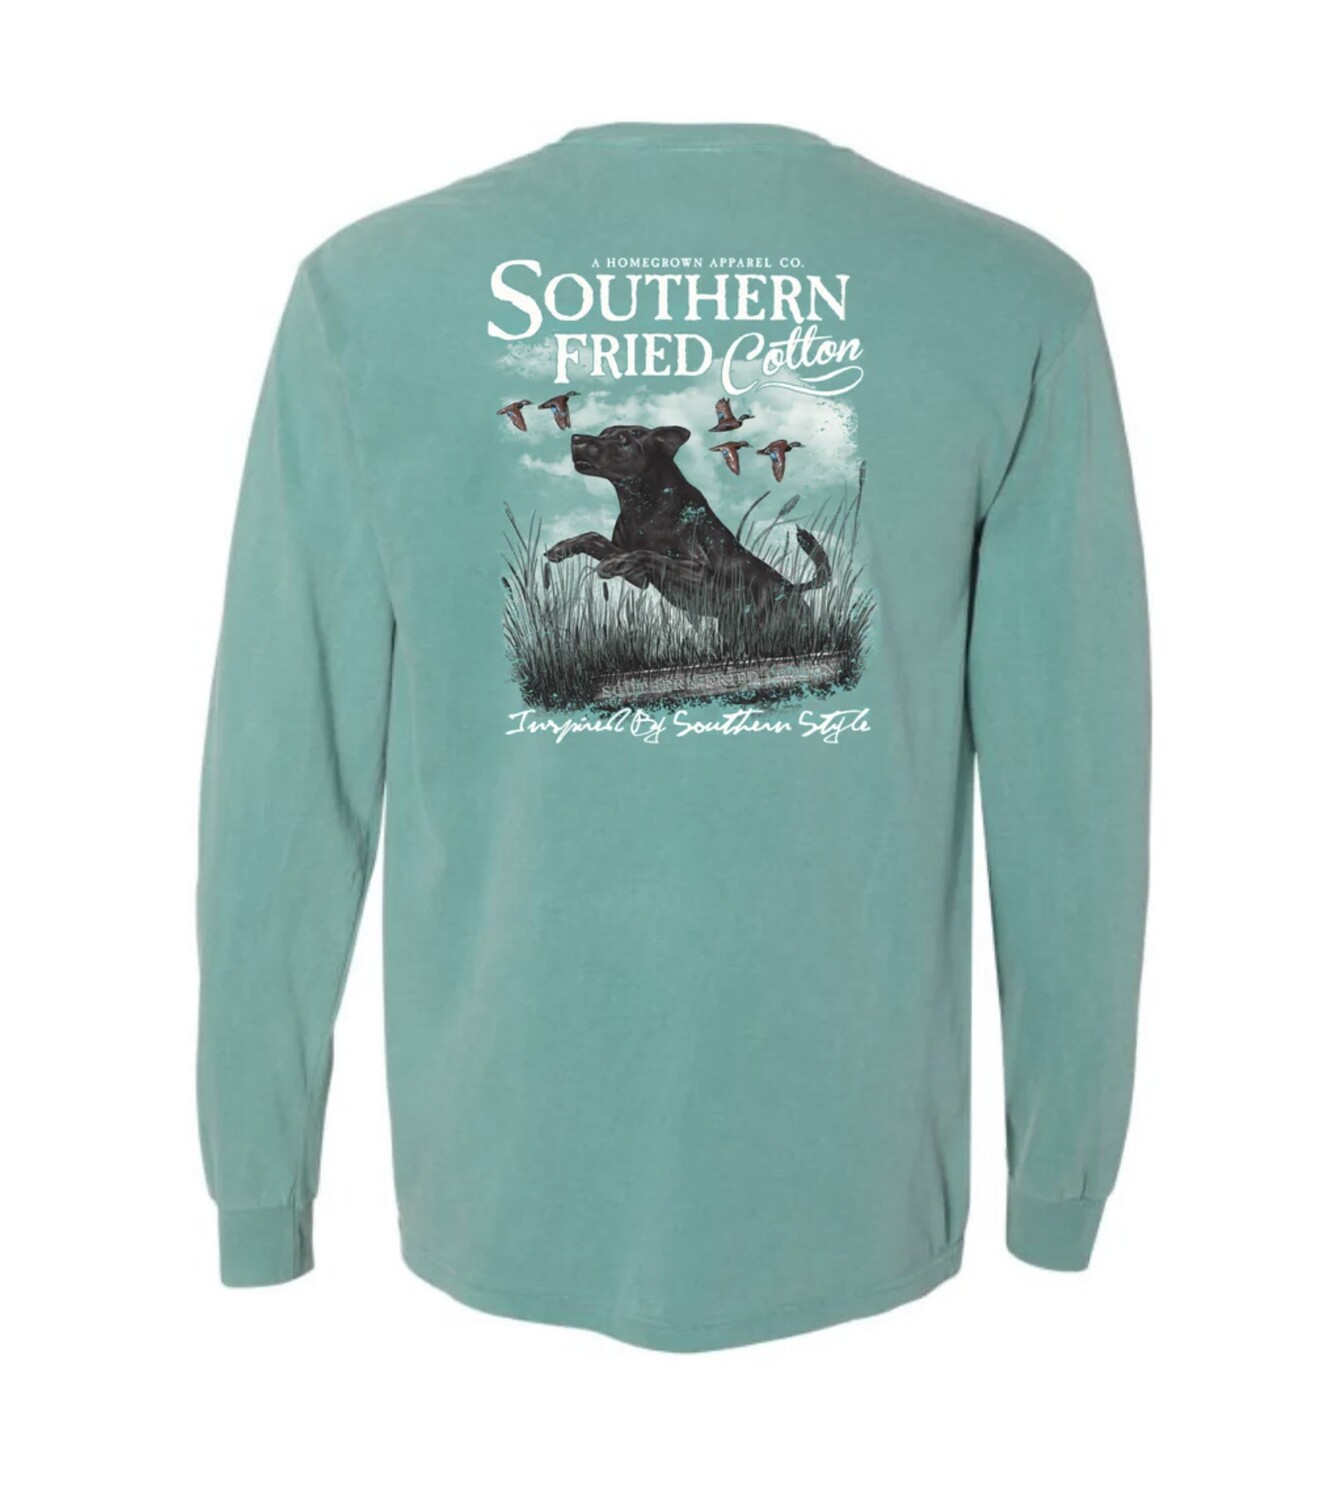 Southern Fried Cotton Fetch It Up Long Sleeve Tee